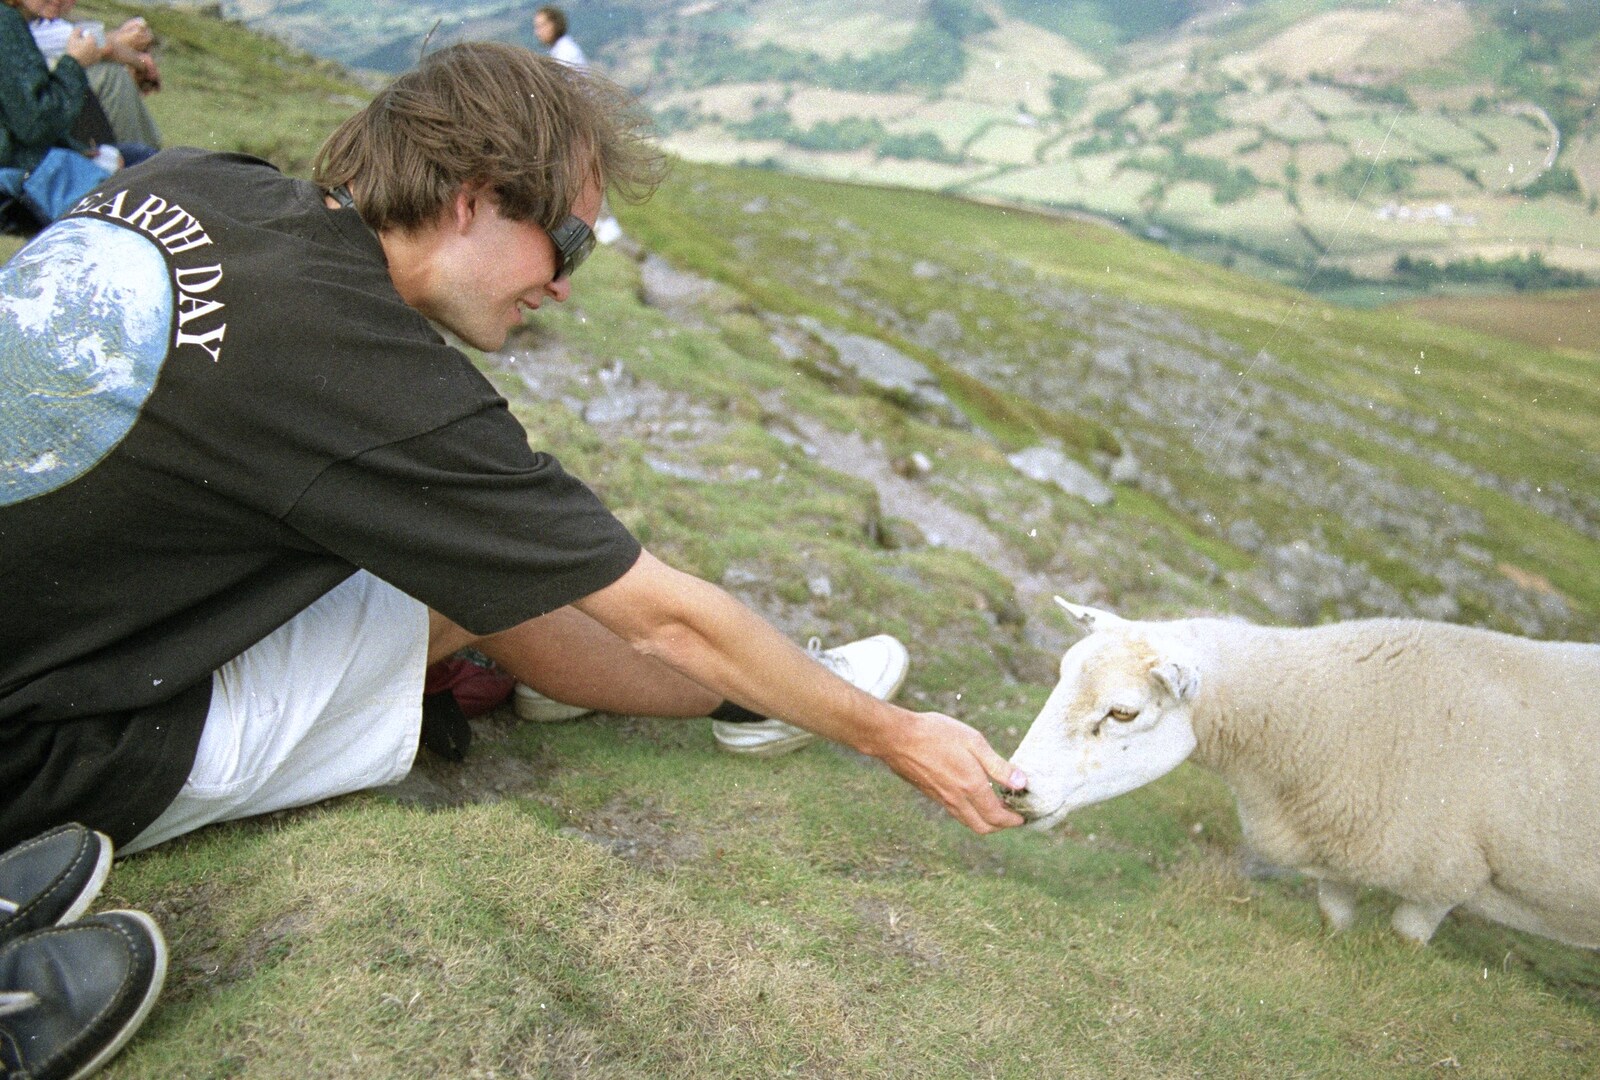 Phil reaches out to a sheep from A Walk in the Brecon Beacons, Bannau Brycheiniog, Wales - 5th August 1990